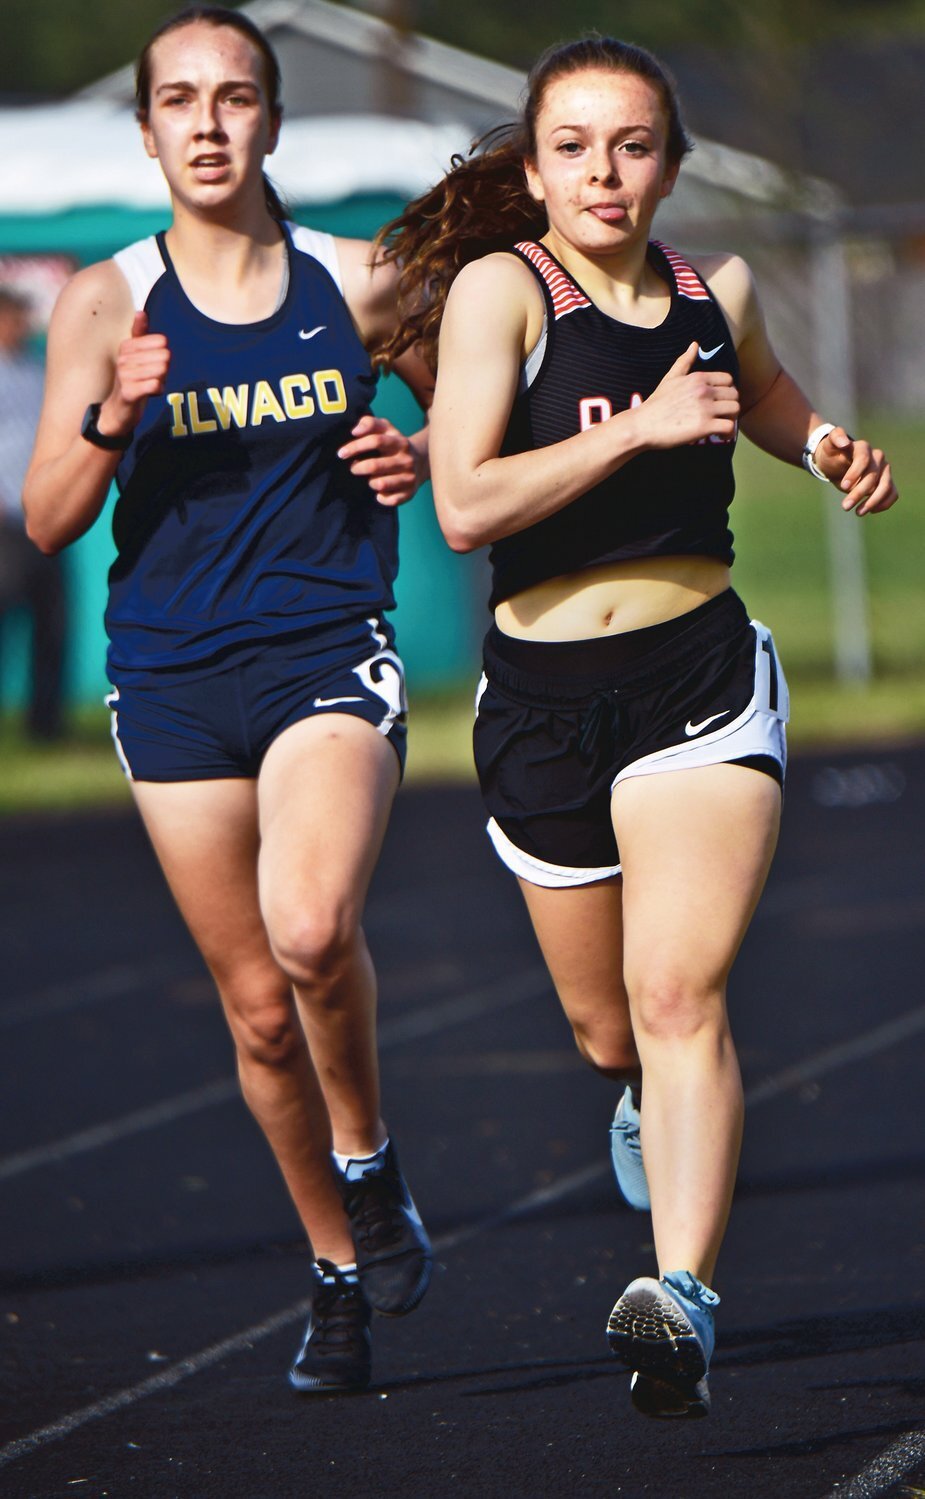 Rainier High School’s Selena Niemi, right, goes on to win the 1,600-meter run on Thursday, April 29, during the WIAA 2B District 4 Track & Field Championships at Rainier High School.